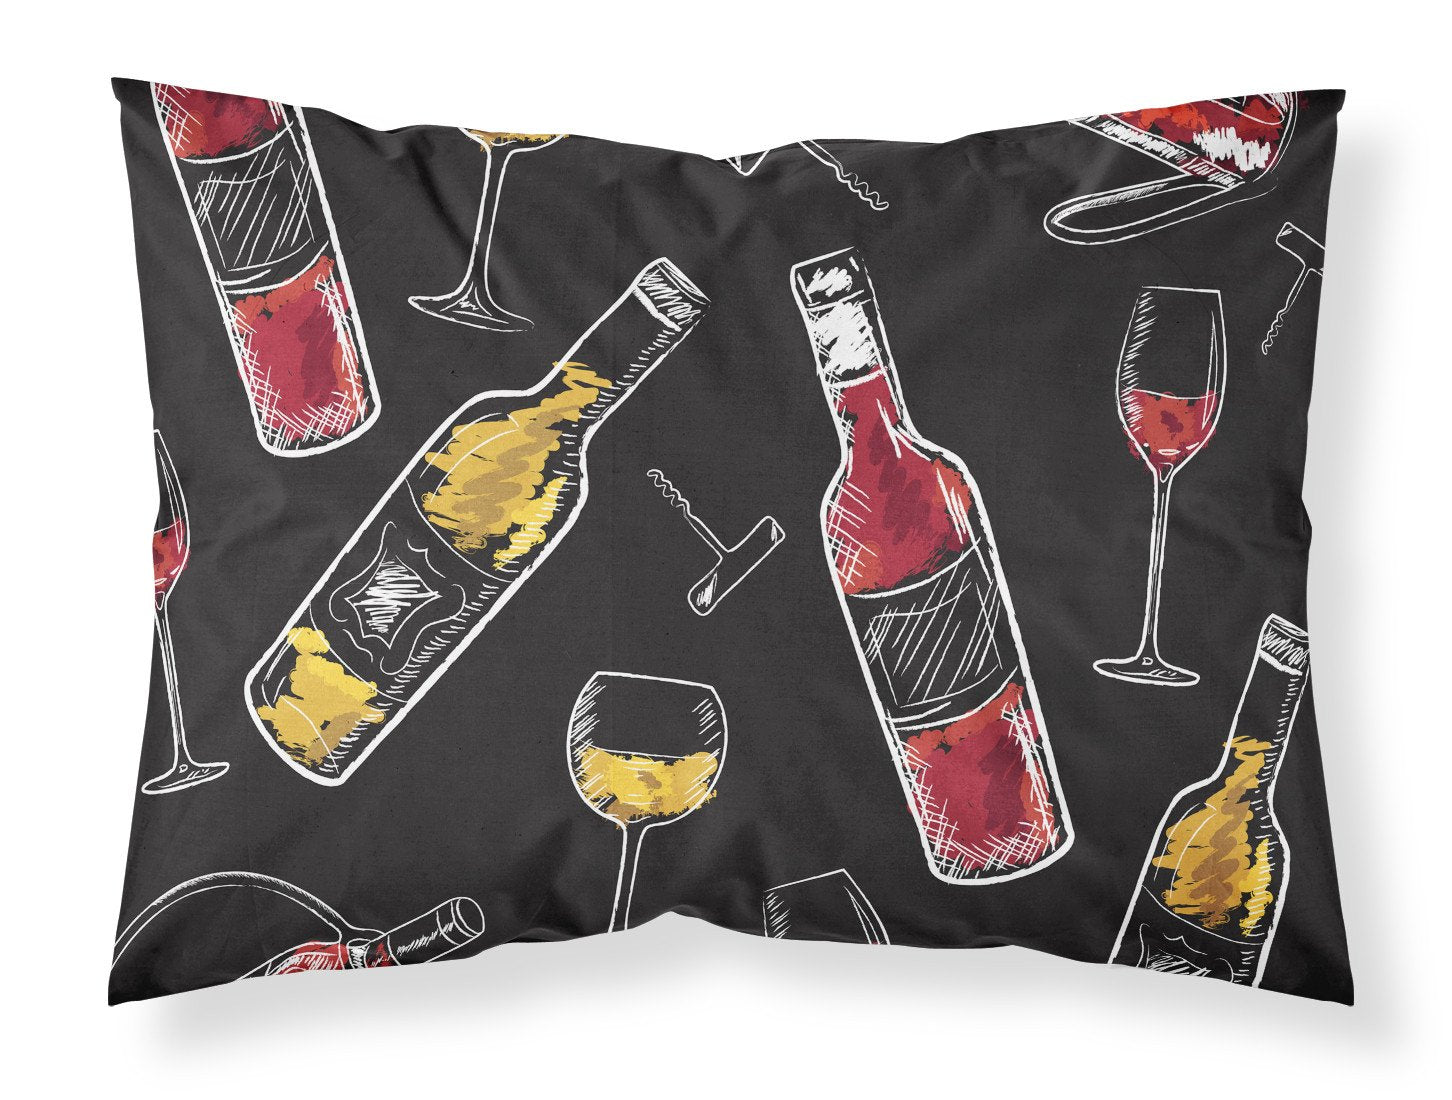 Red and White Wine on Black Fabric Standard Pillowcase BB5197PILLOWCASE by Caroline's Treasures